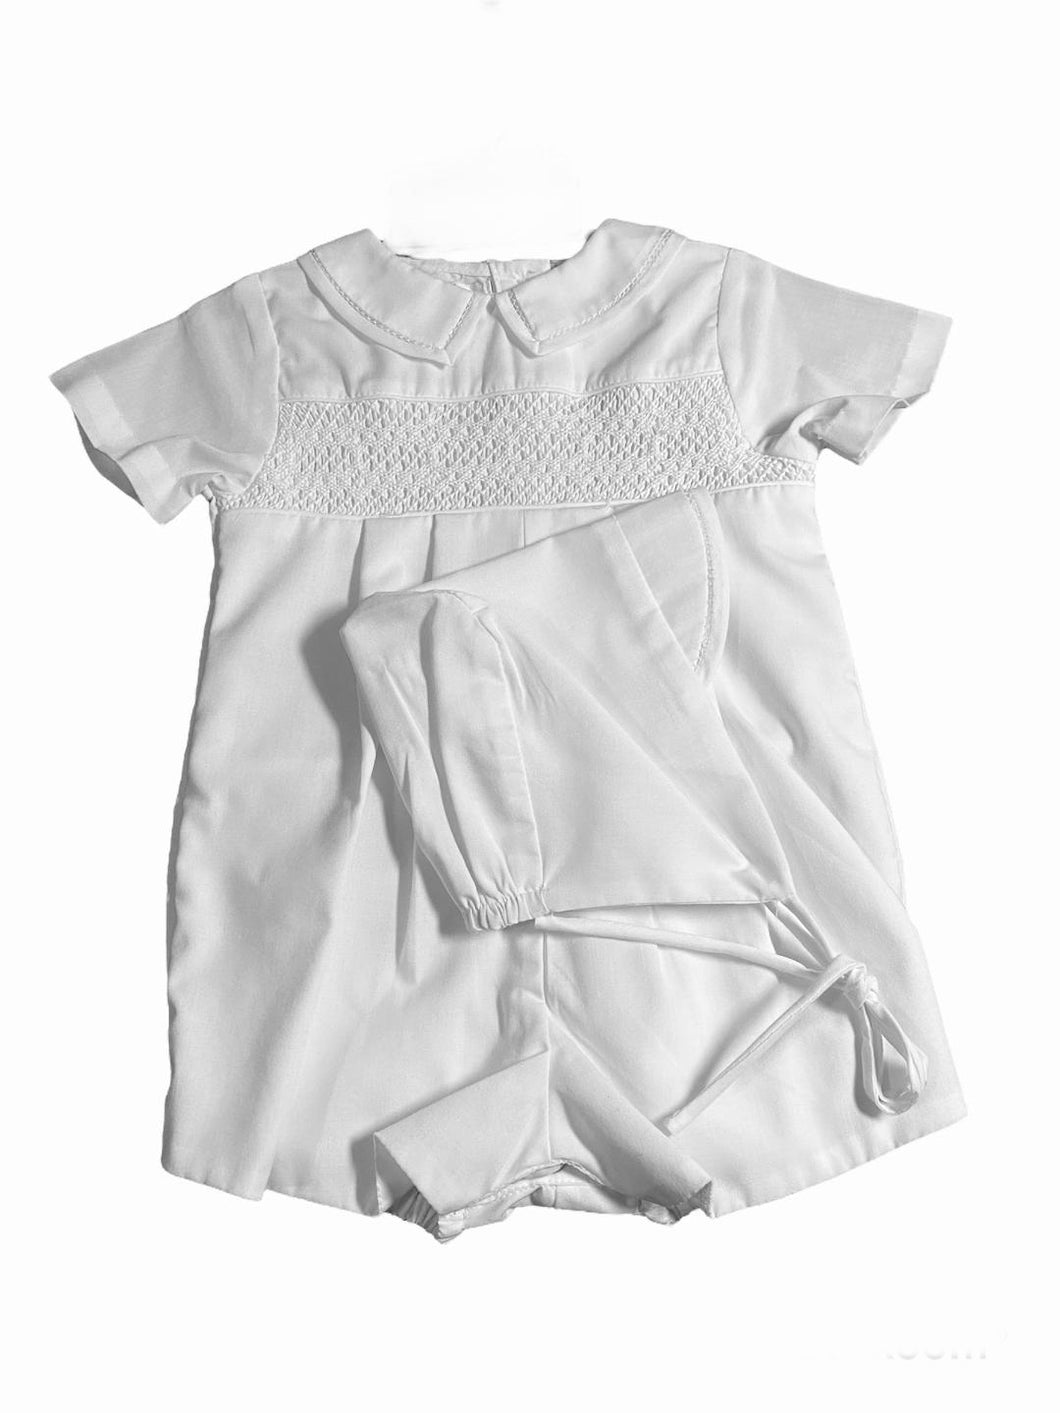 White Diamond Smocked Romper with Hat | 6 or 9 Months